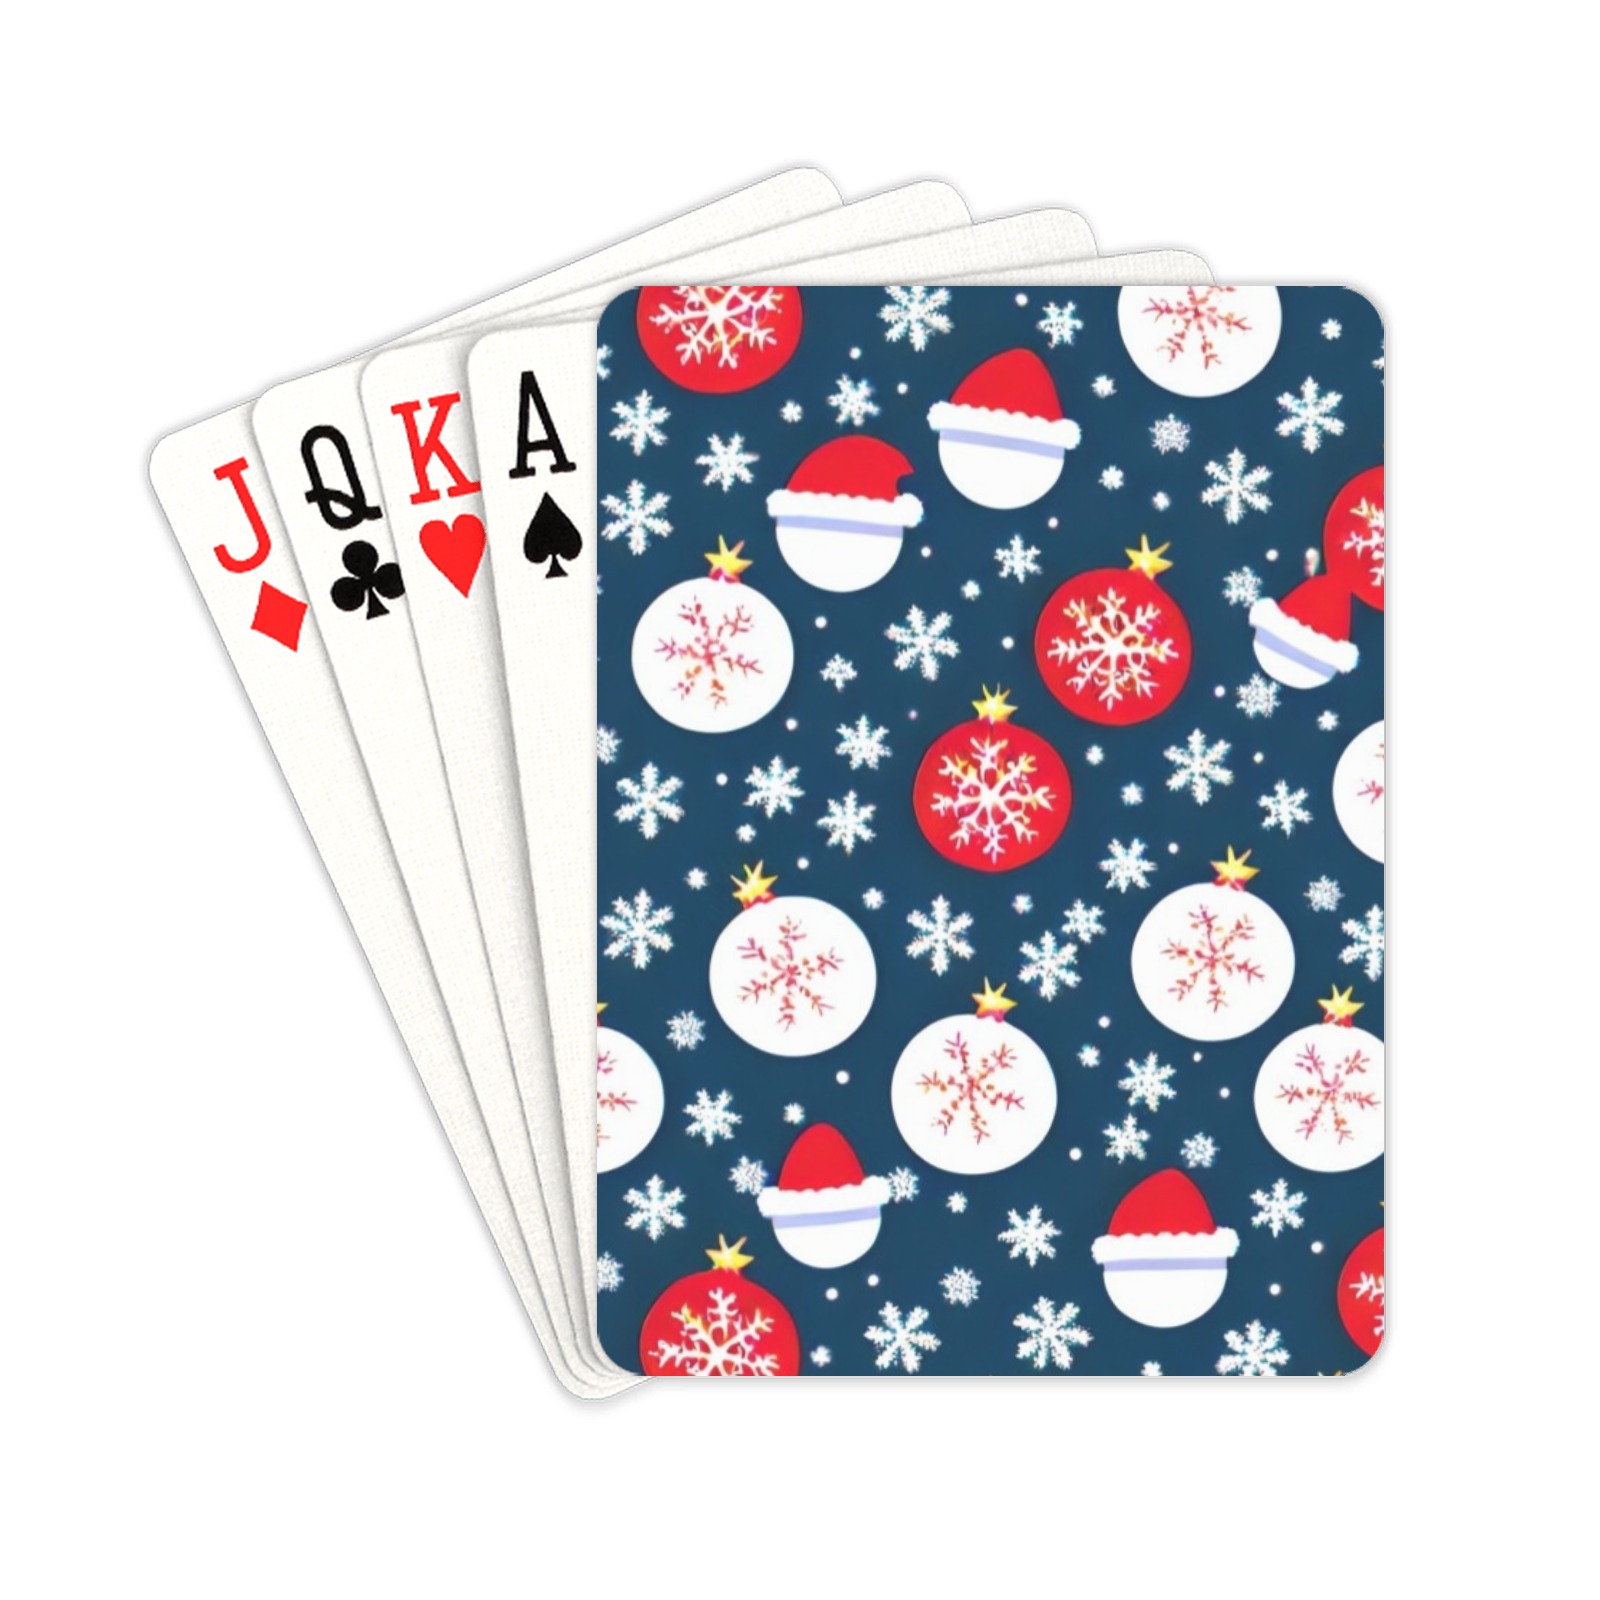 c2 Playing Cards 2.5"x3.5"